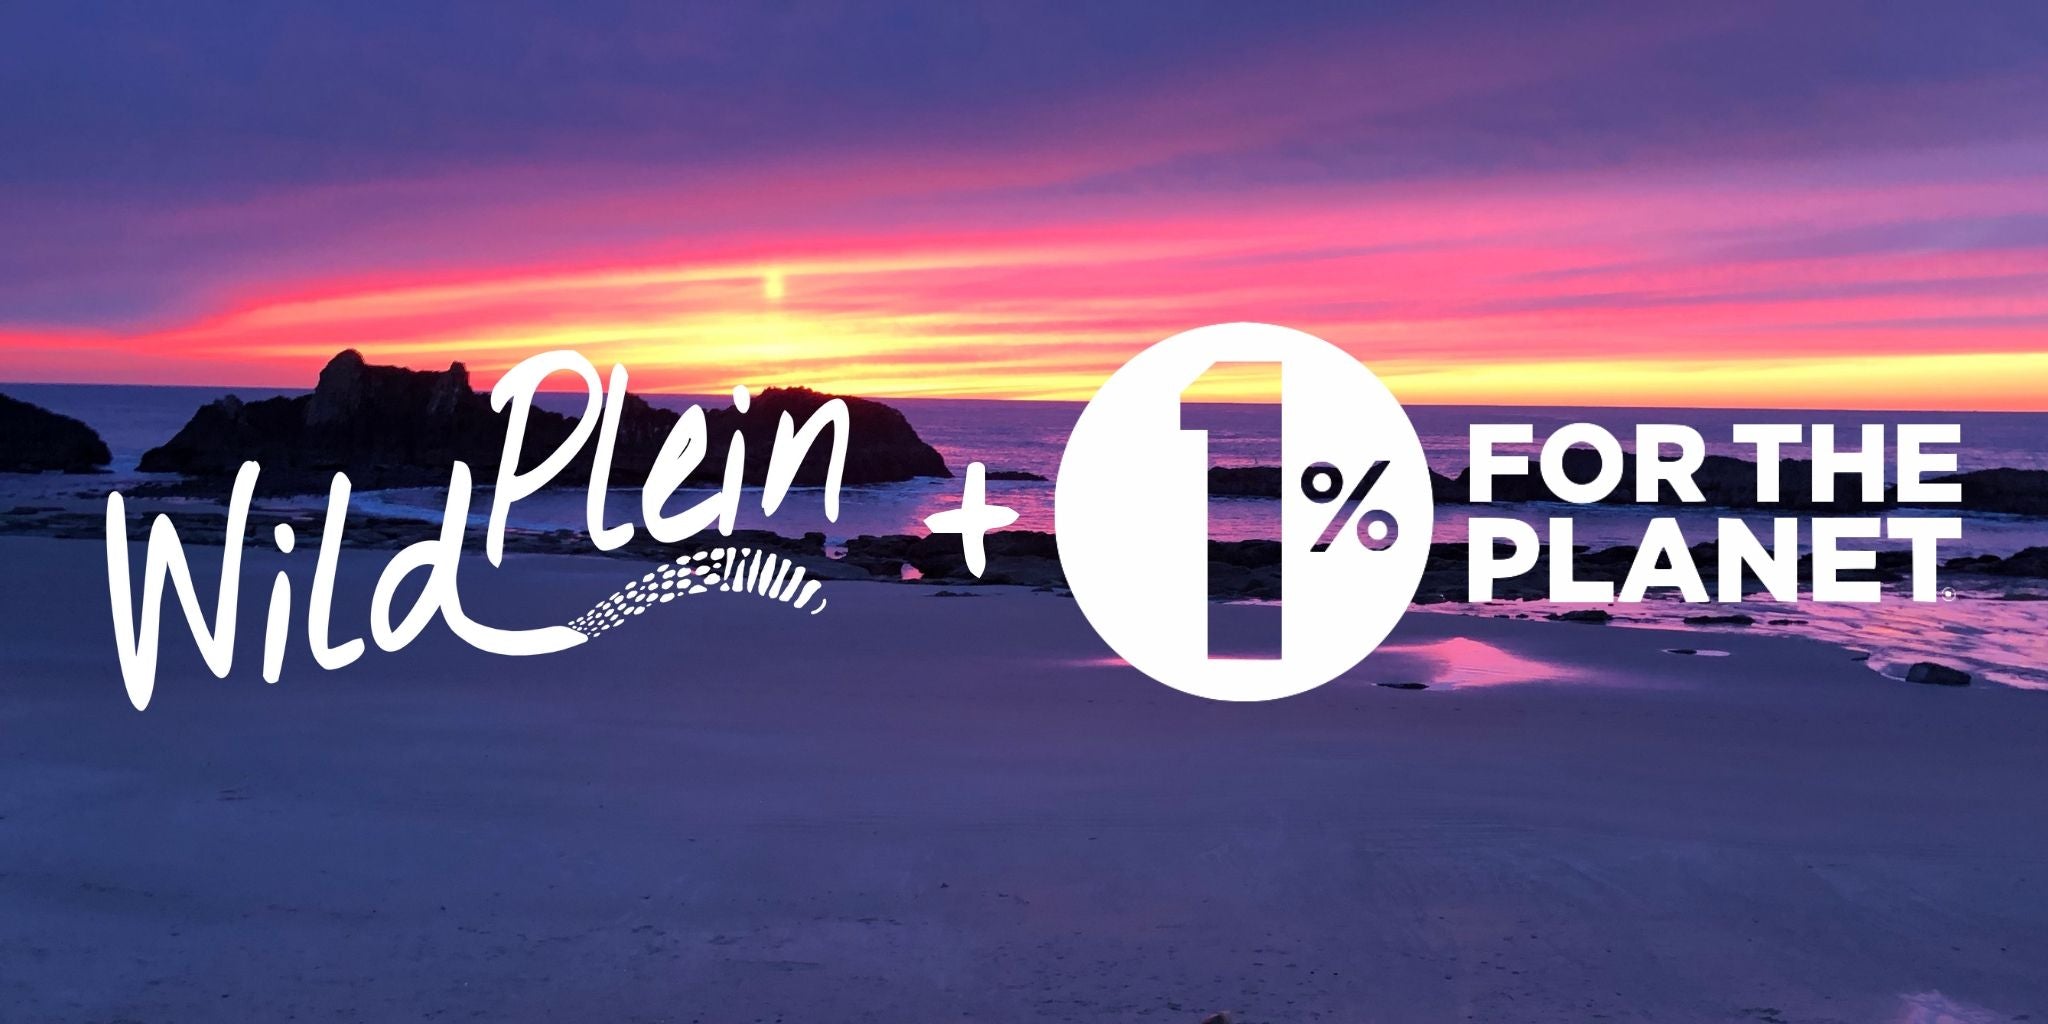 Wild Plein + One Percent for The Planet Sunset